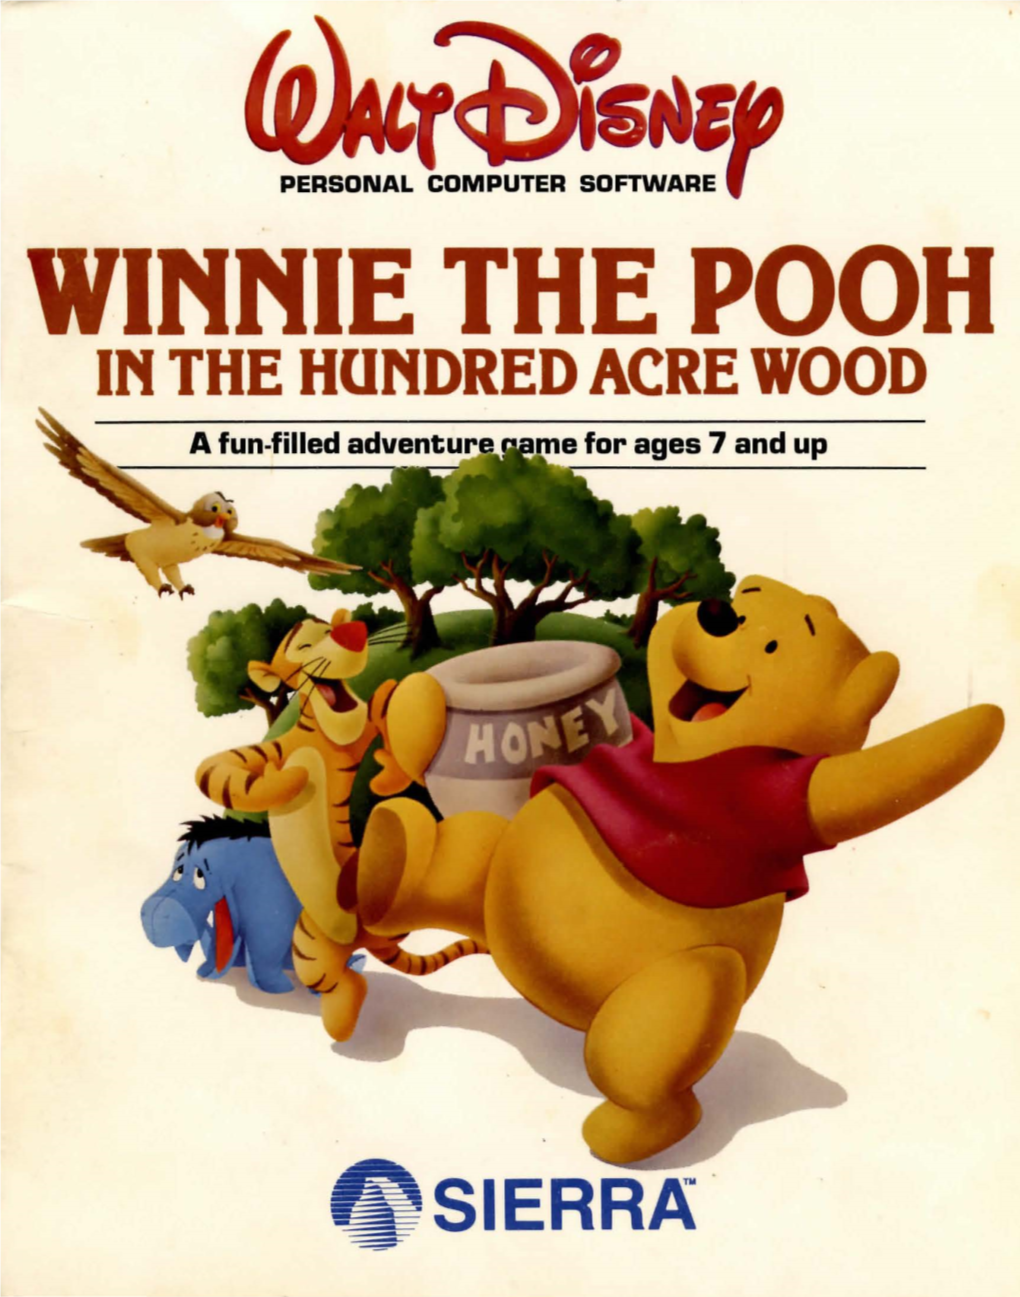 Winnie the Pooh in the Hundred Acre Wood Winnie the Pooh in the Hundred Acre Wood